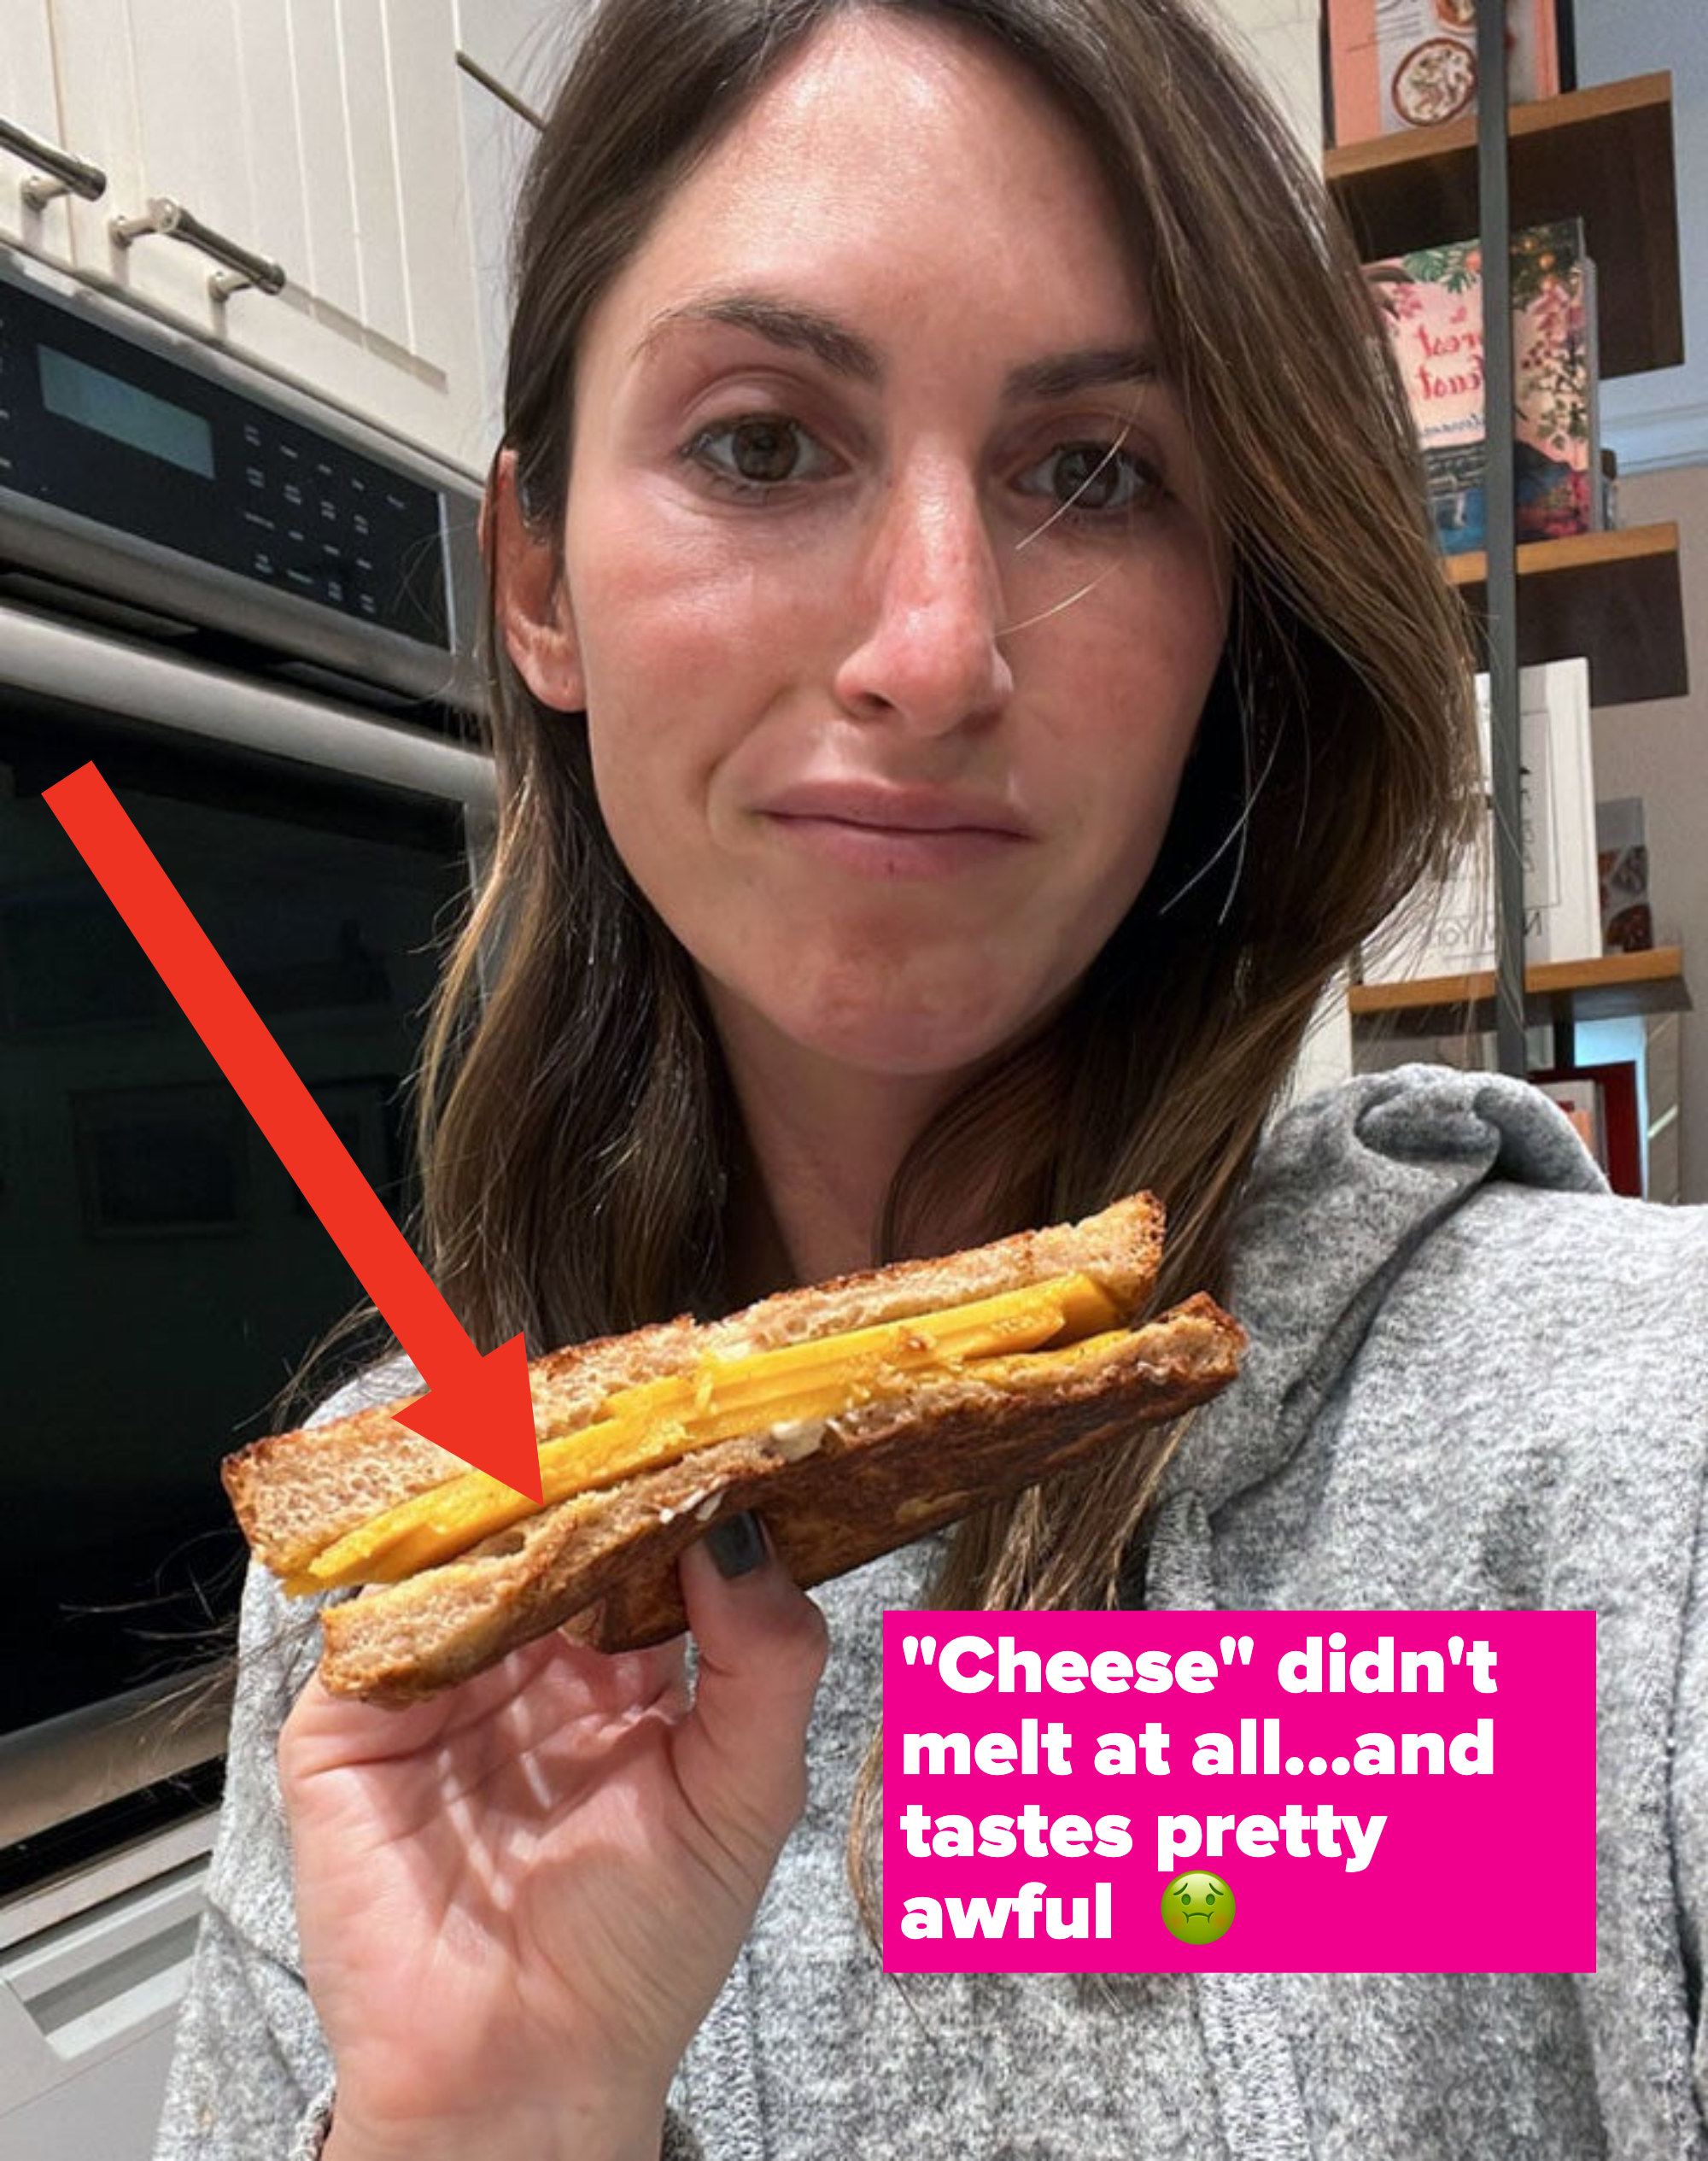 A woman holding a grilled cheese sandwich looking unhappy.